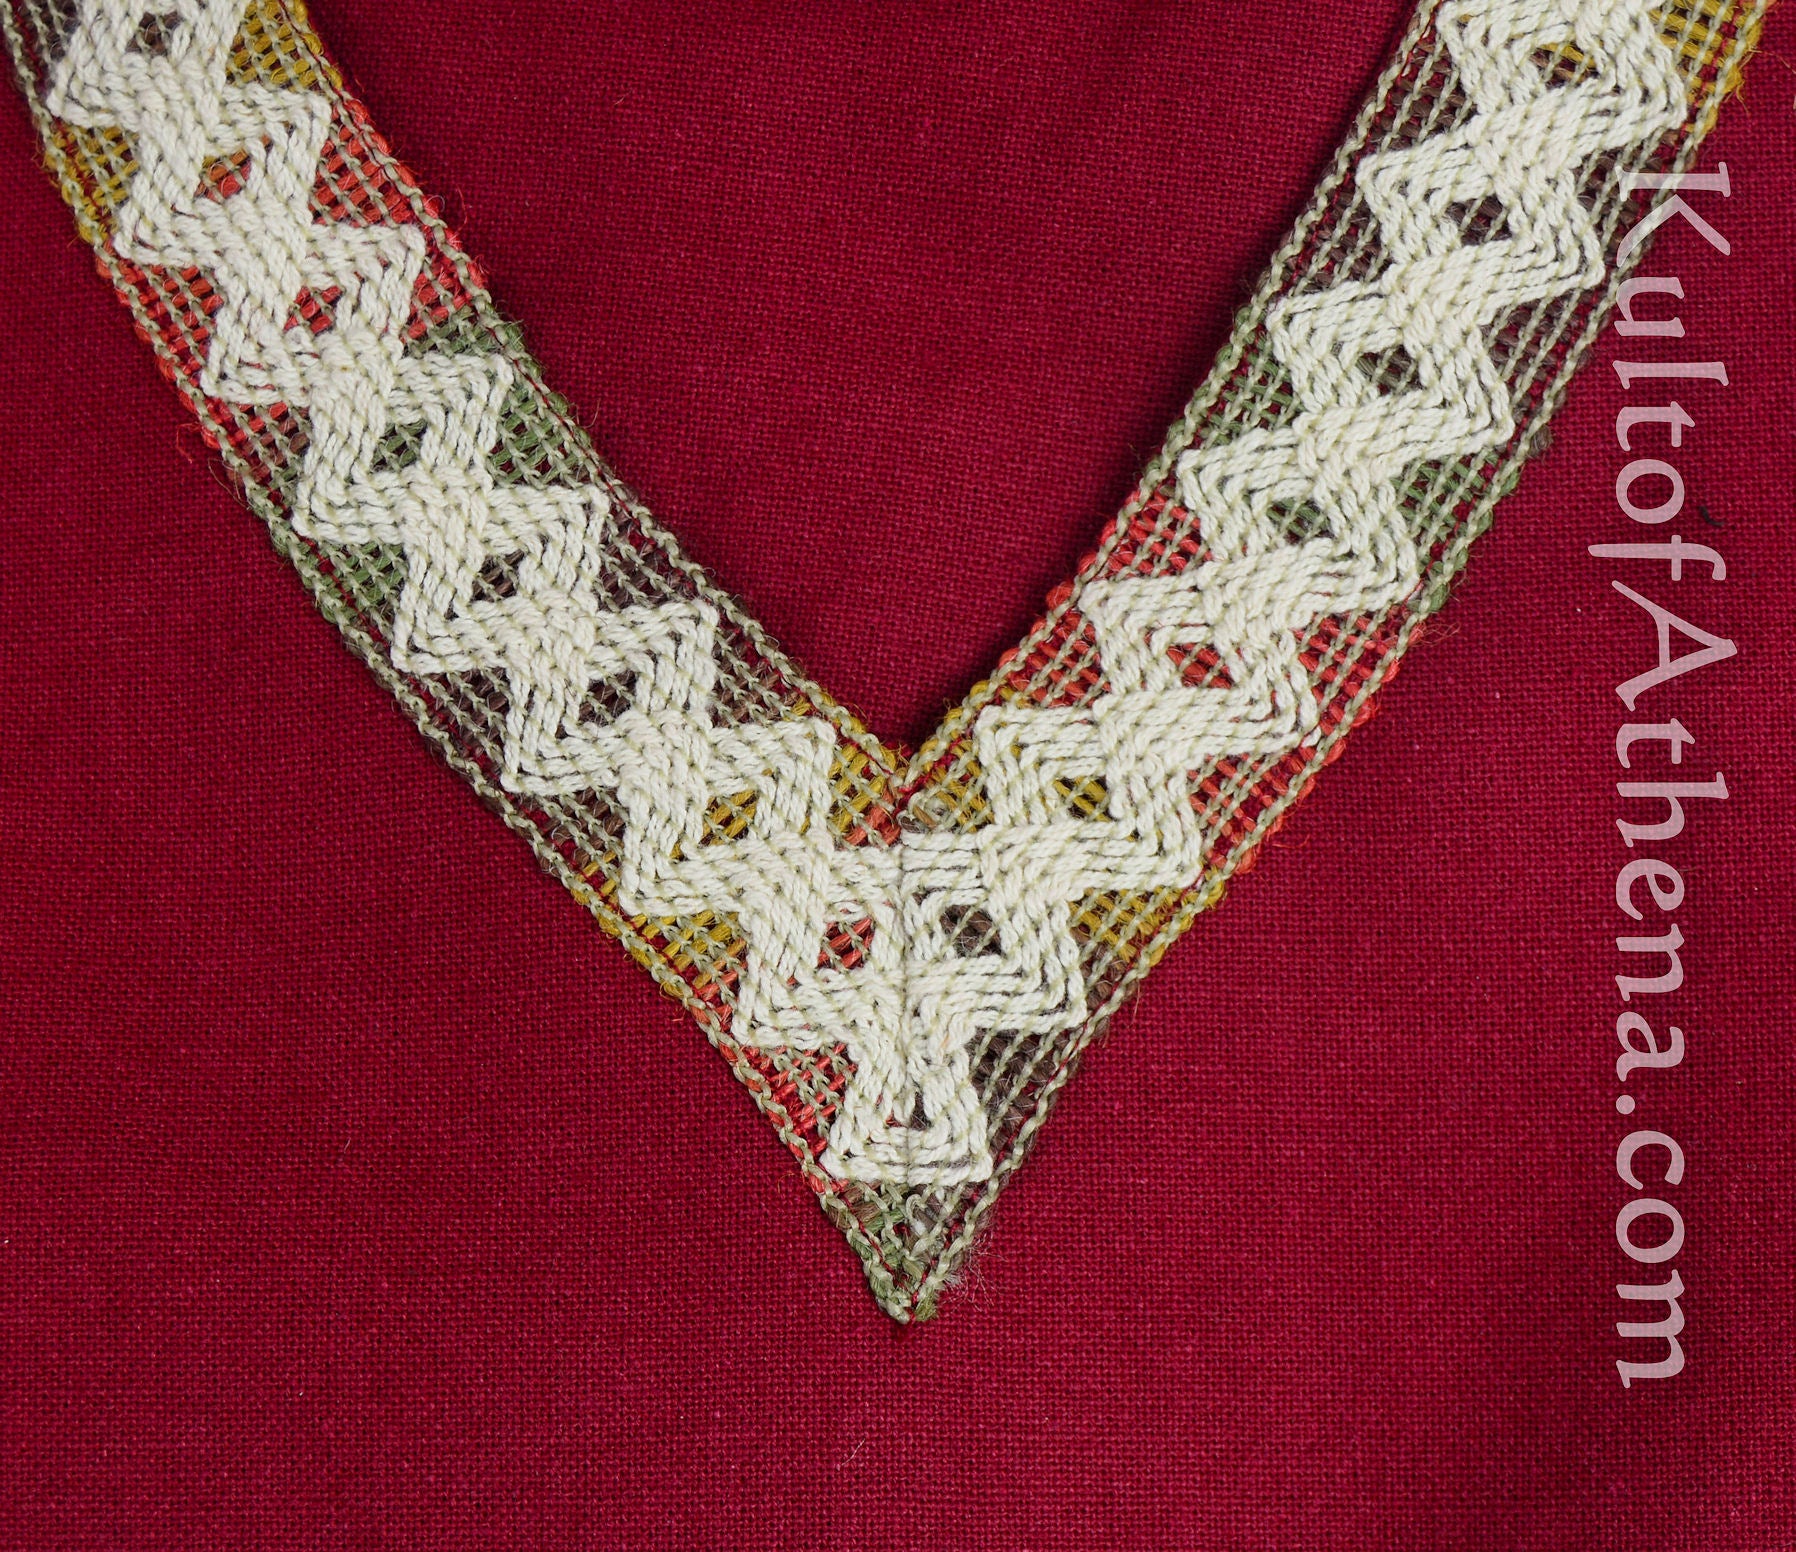 close up of the detail on the tunic collar